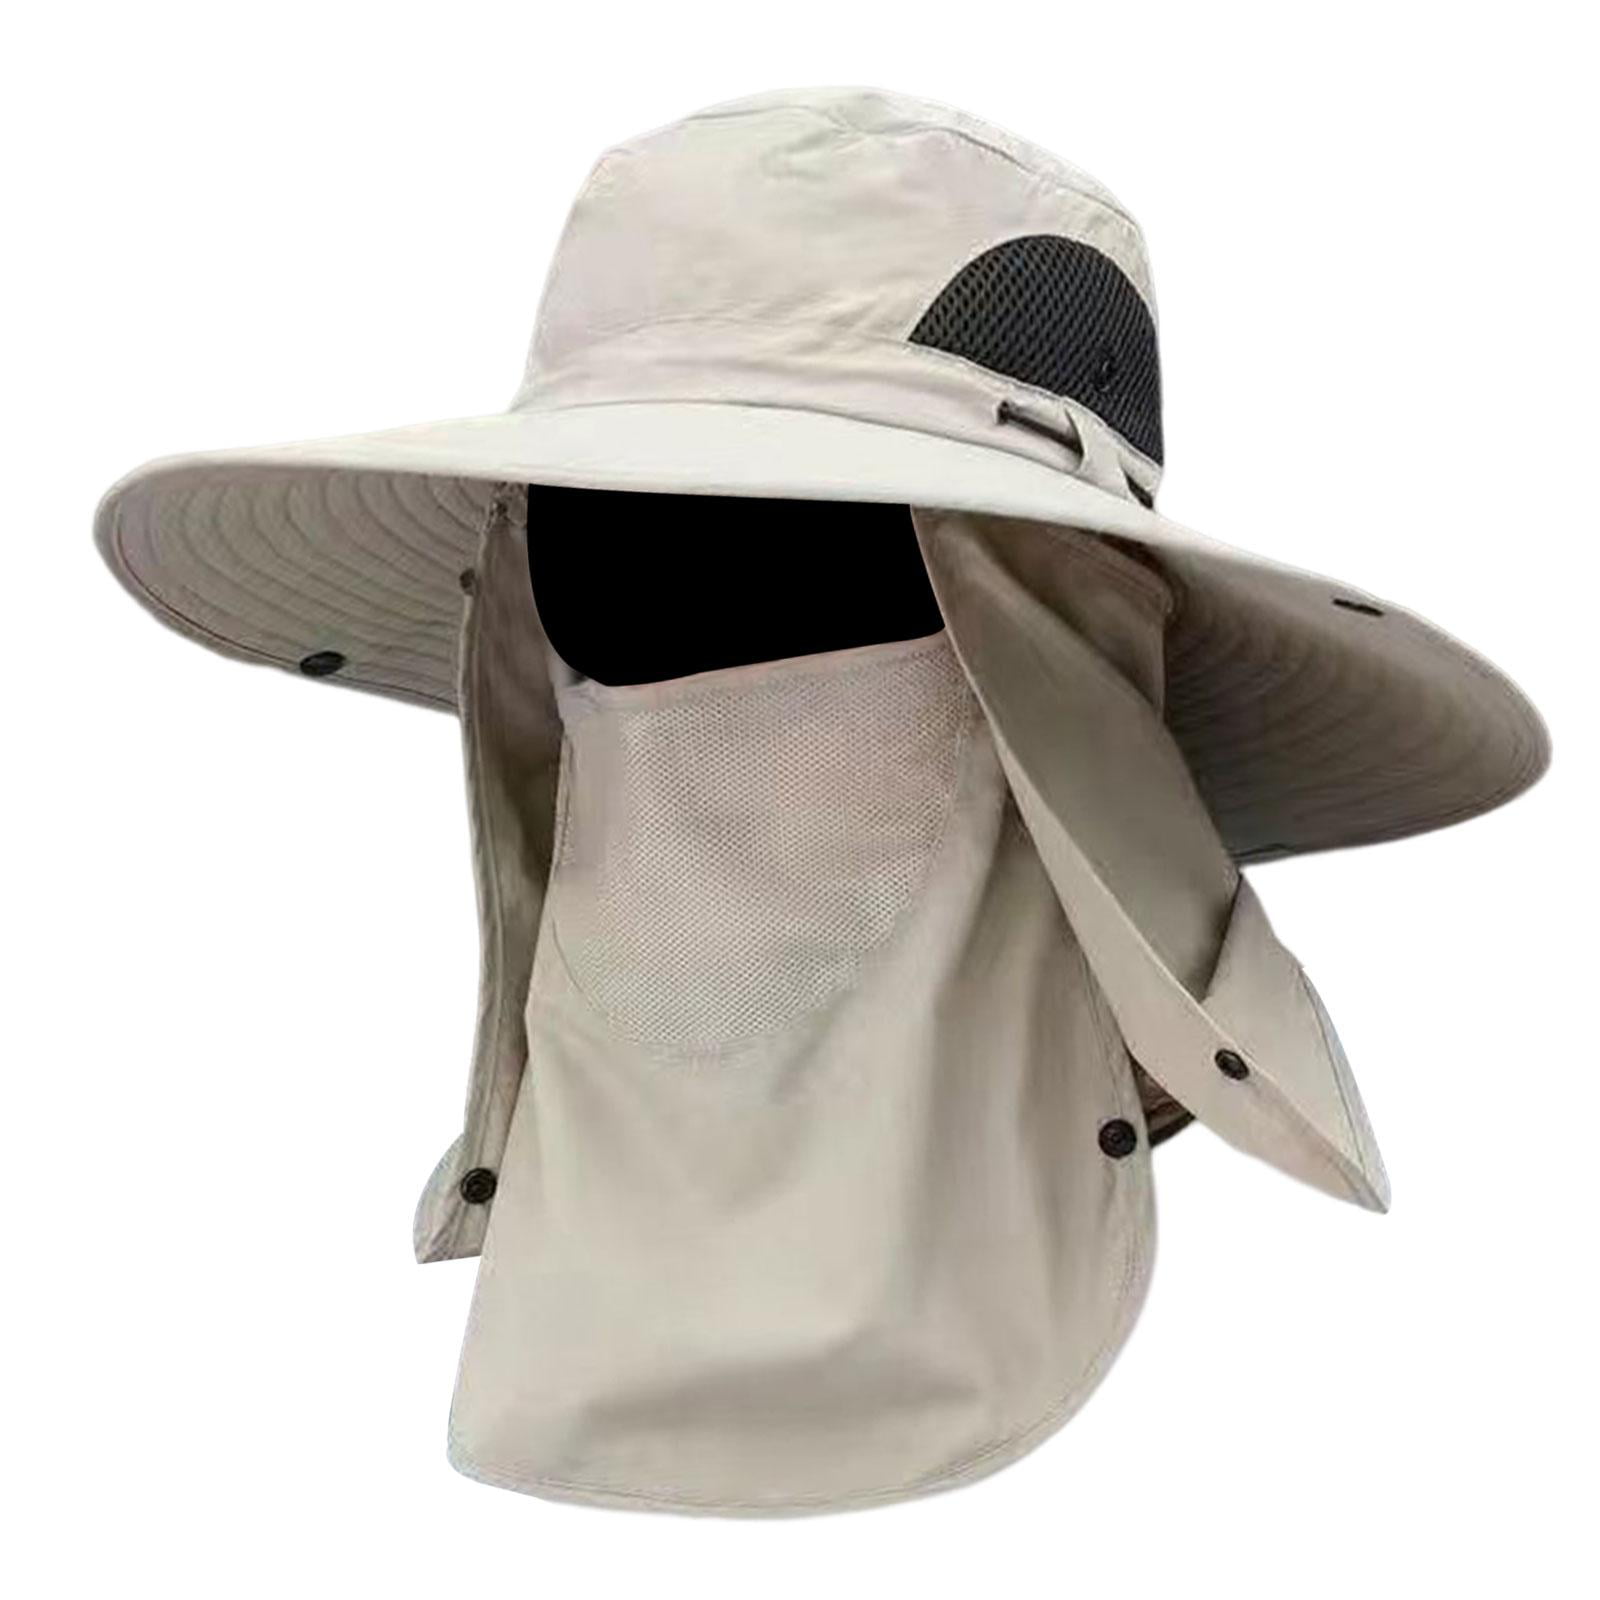 Fishing Hat,Fishing Hat with Removable Cover Neck Flap Cover,Summer Sun  Protection Hiking Beach Sun Hat Outdoor,Baseball Hat Breathable Wide Brim  Bucket Hat,Unisex Travel Climbing Mesh Beige 